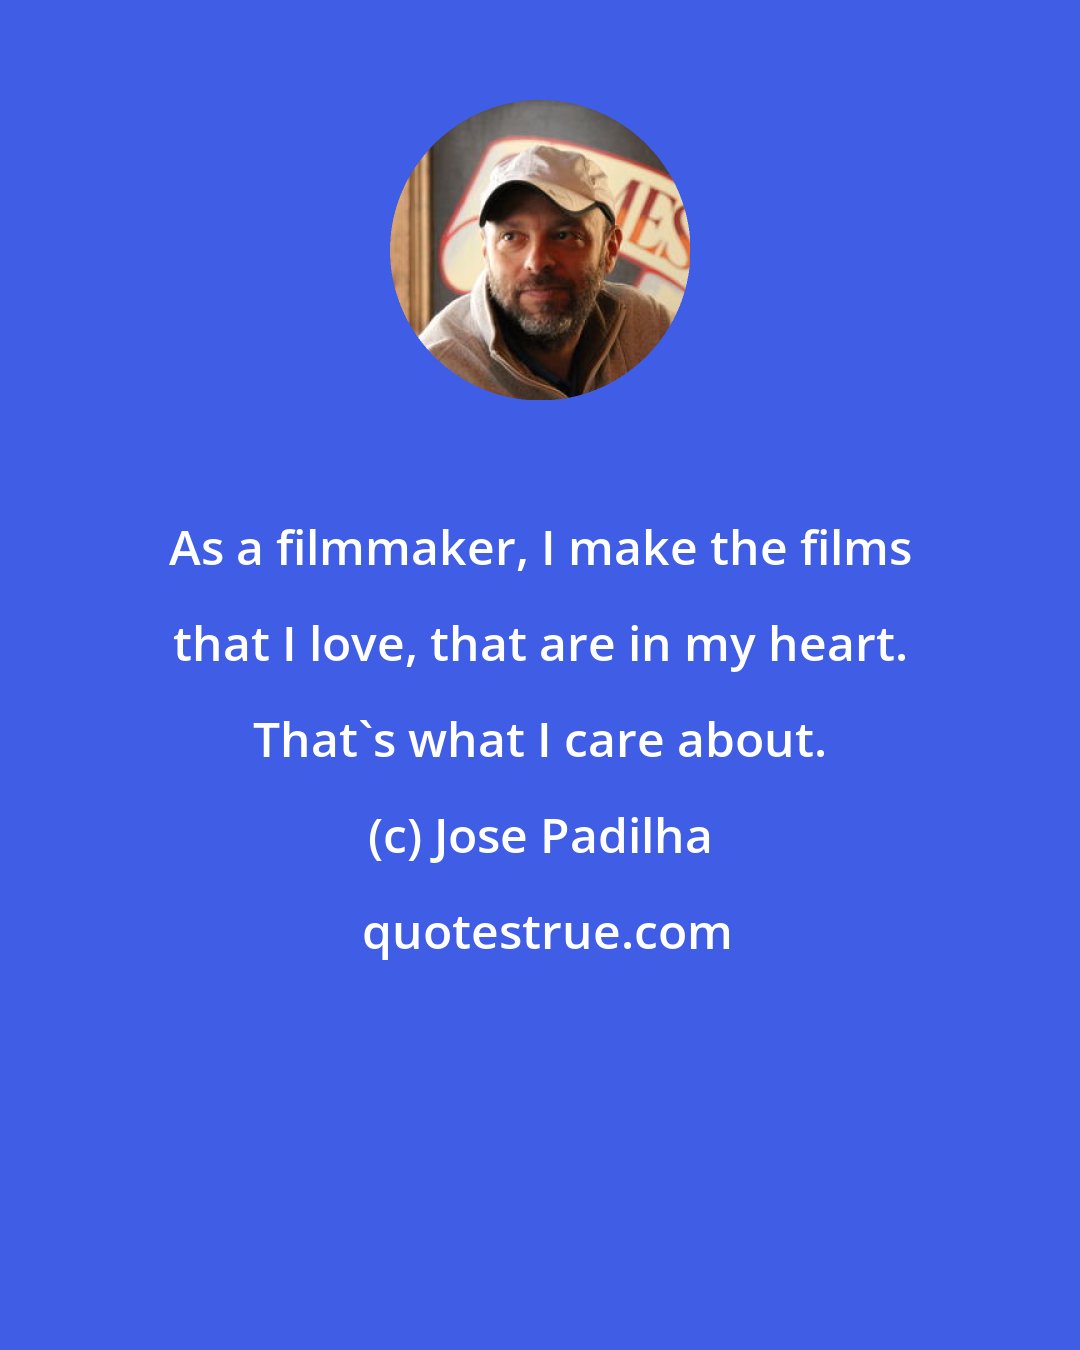 Jose Padilha: As a filmmaker, I make the films that I love, that are in my heart. That's what I care about.